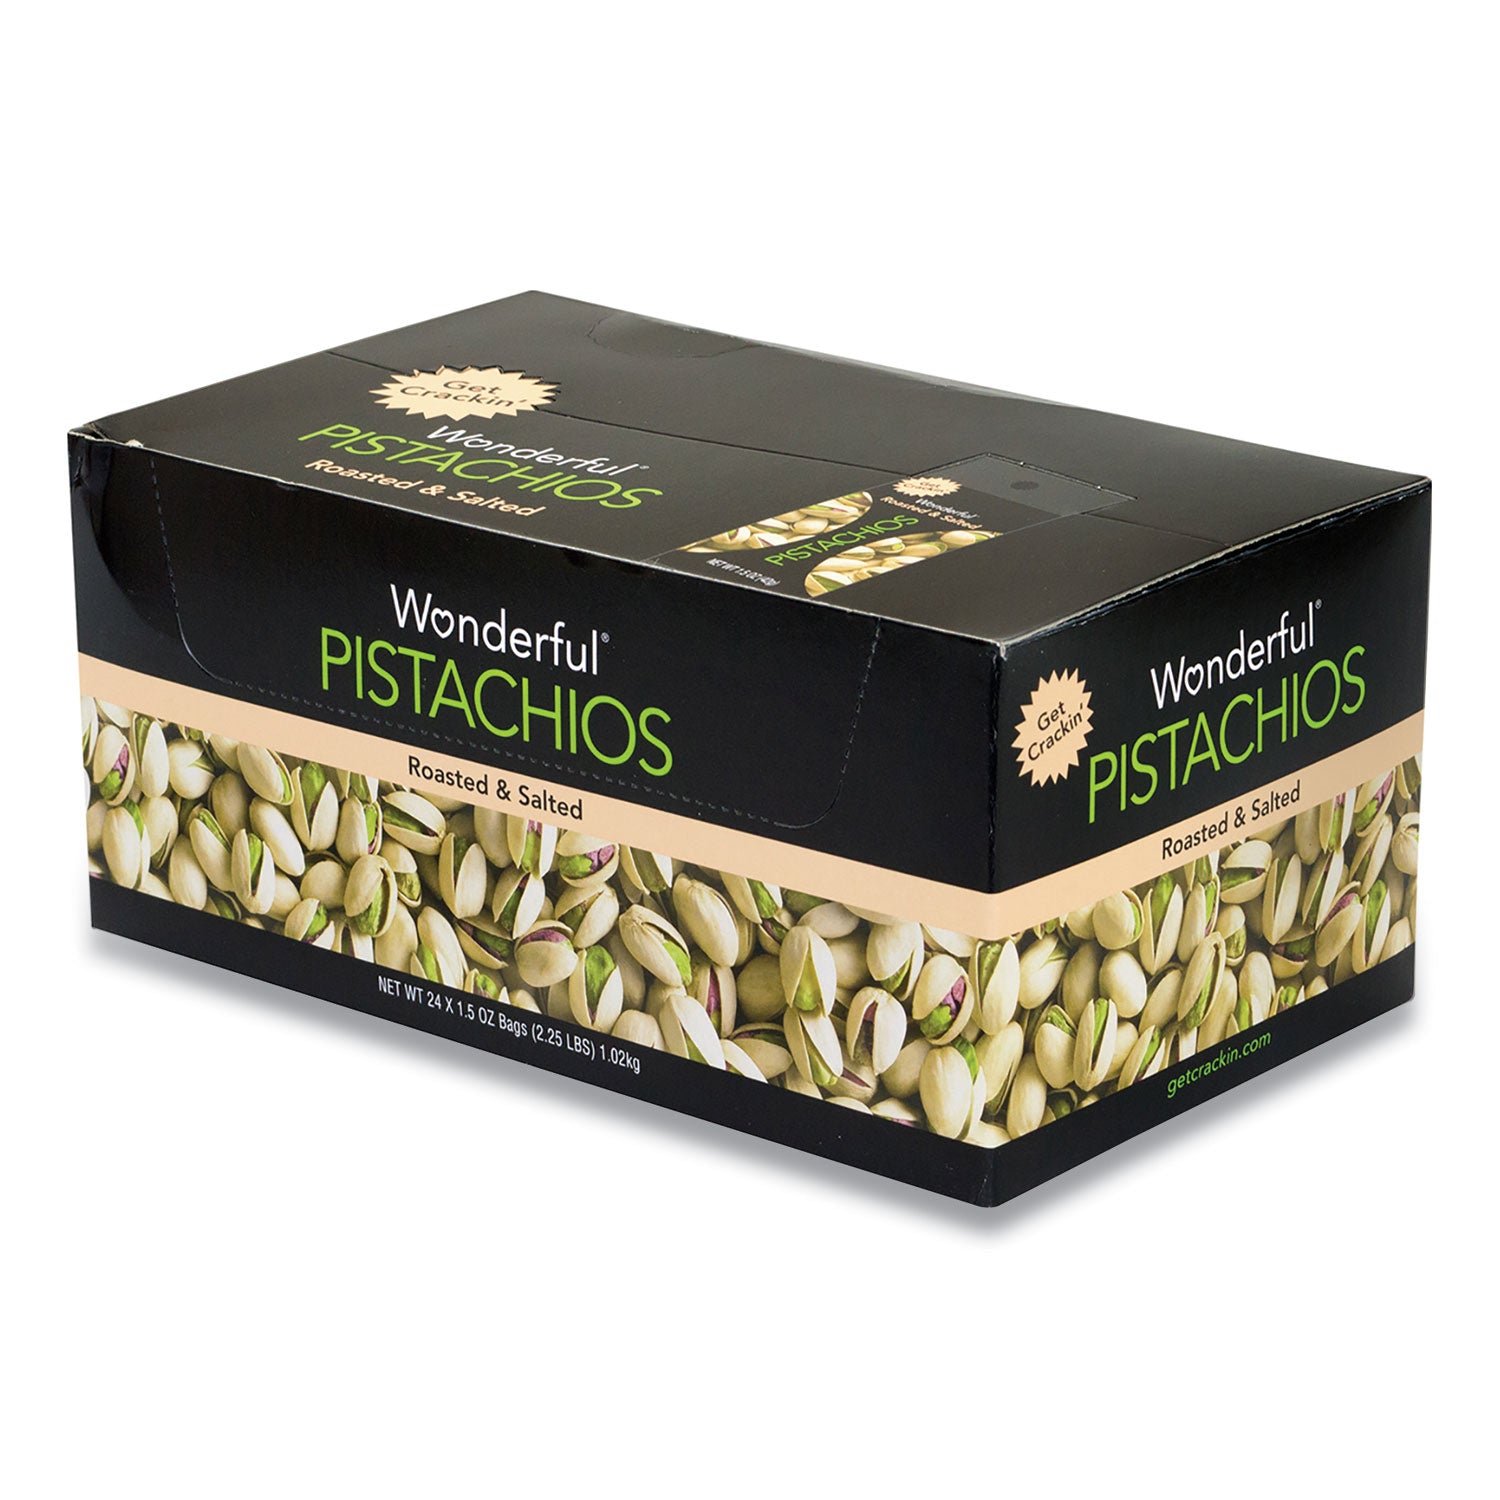 roasted-and-salted-pistachios-15-oz-bag-24-pack-ships-in-1-3-business-days_grr22000784 - 3